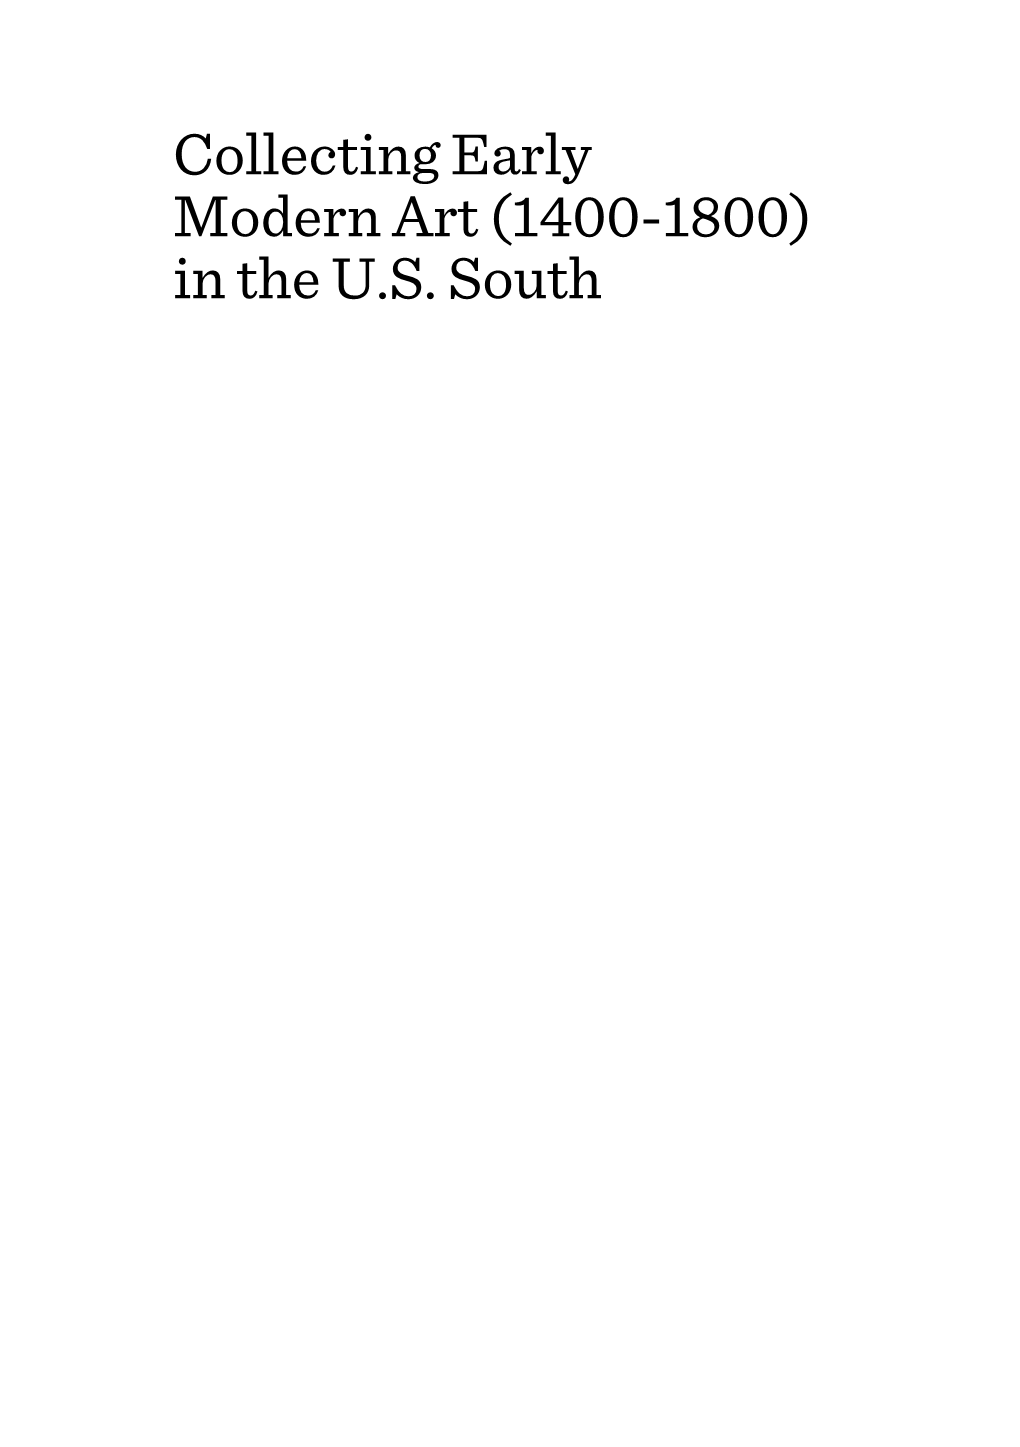 Collecting Early Modern Art (1400-1800) in the U.S. South